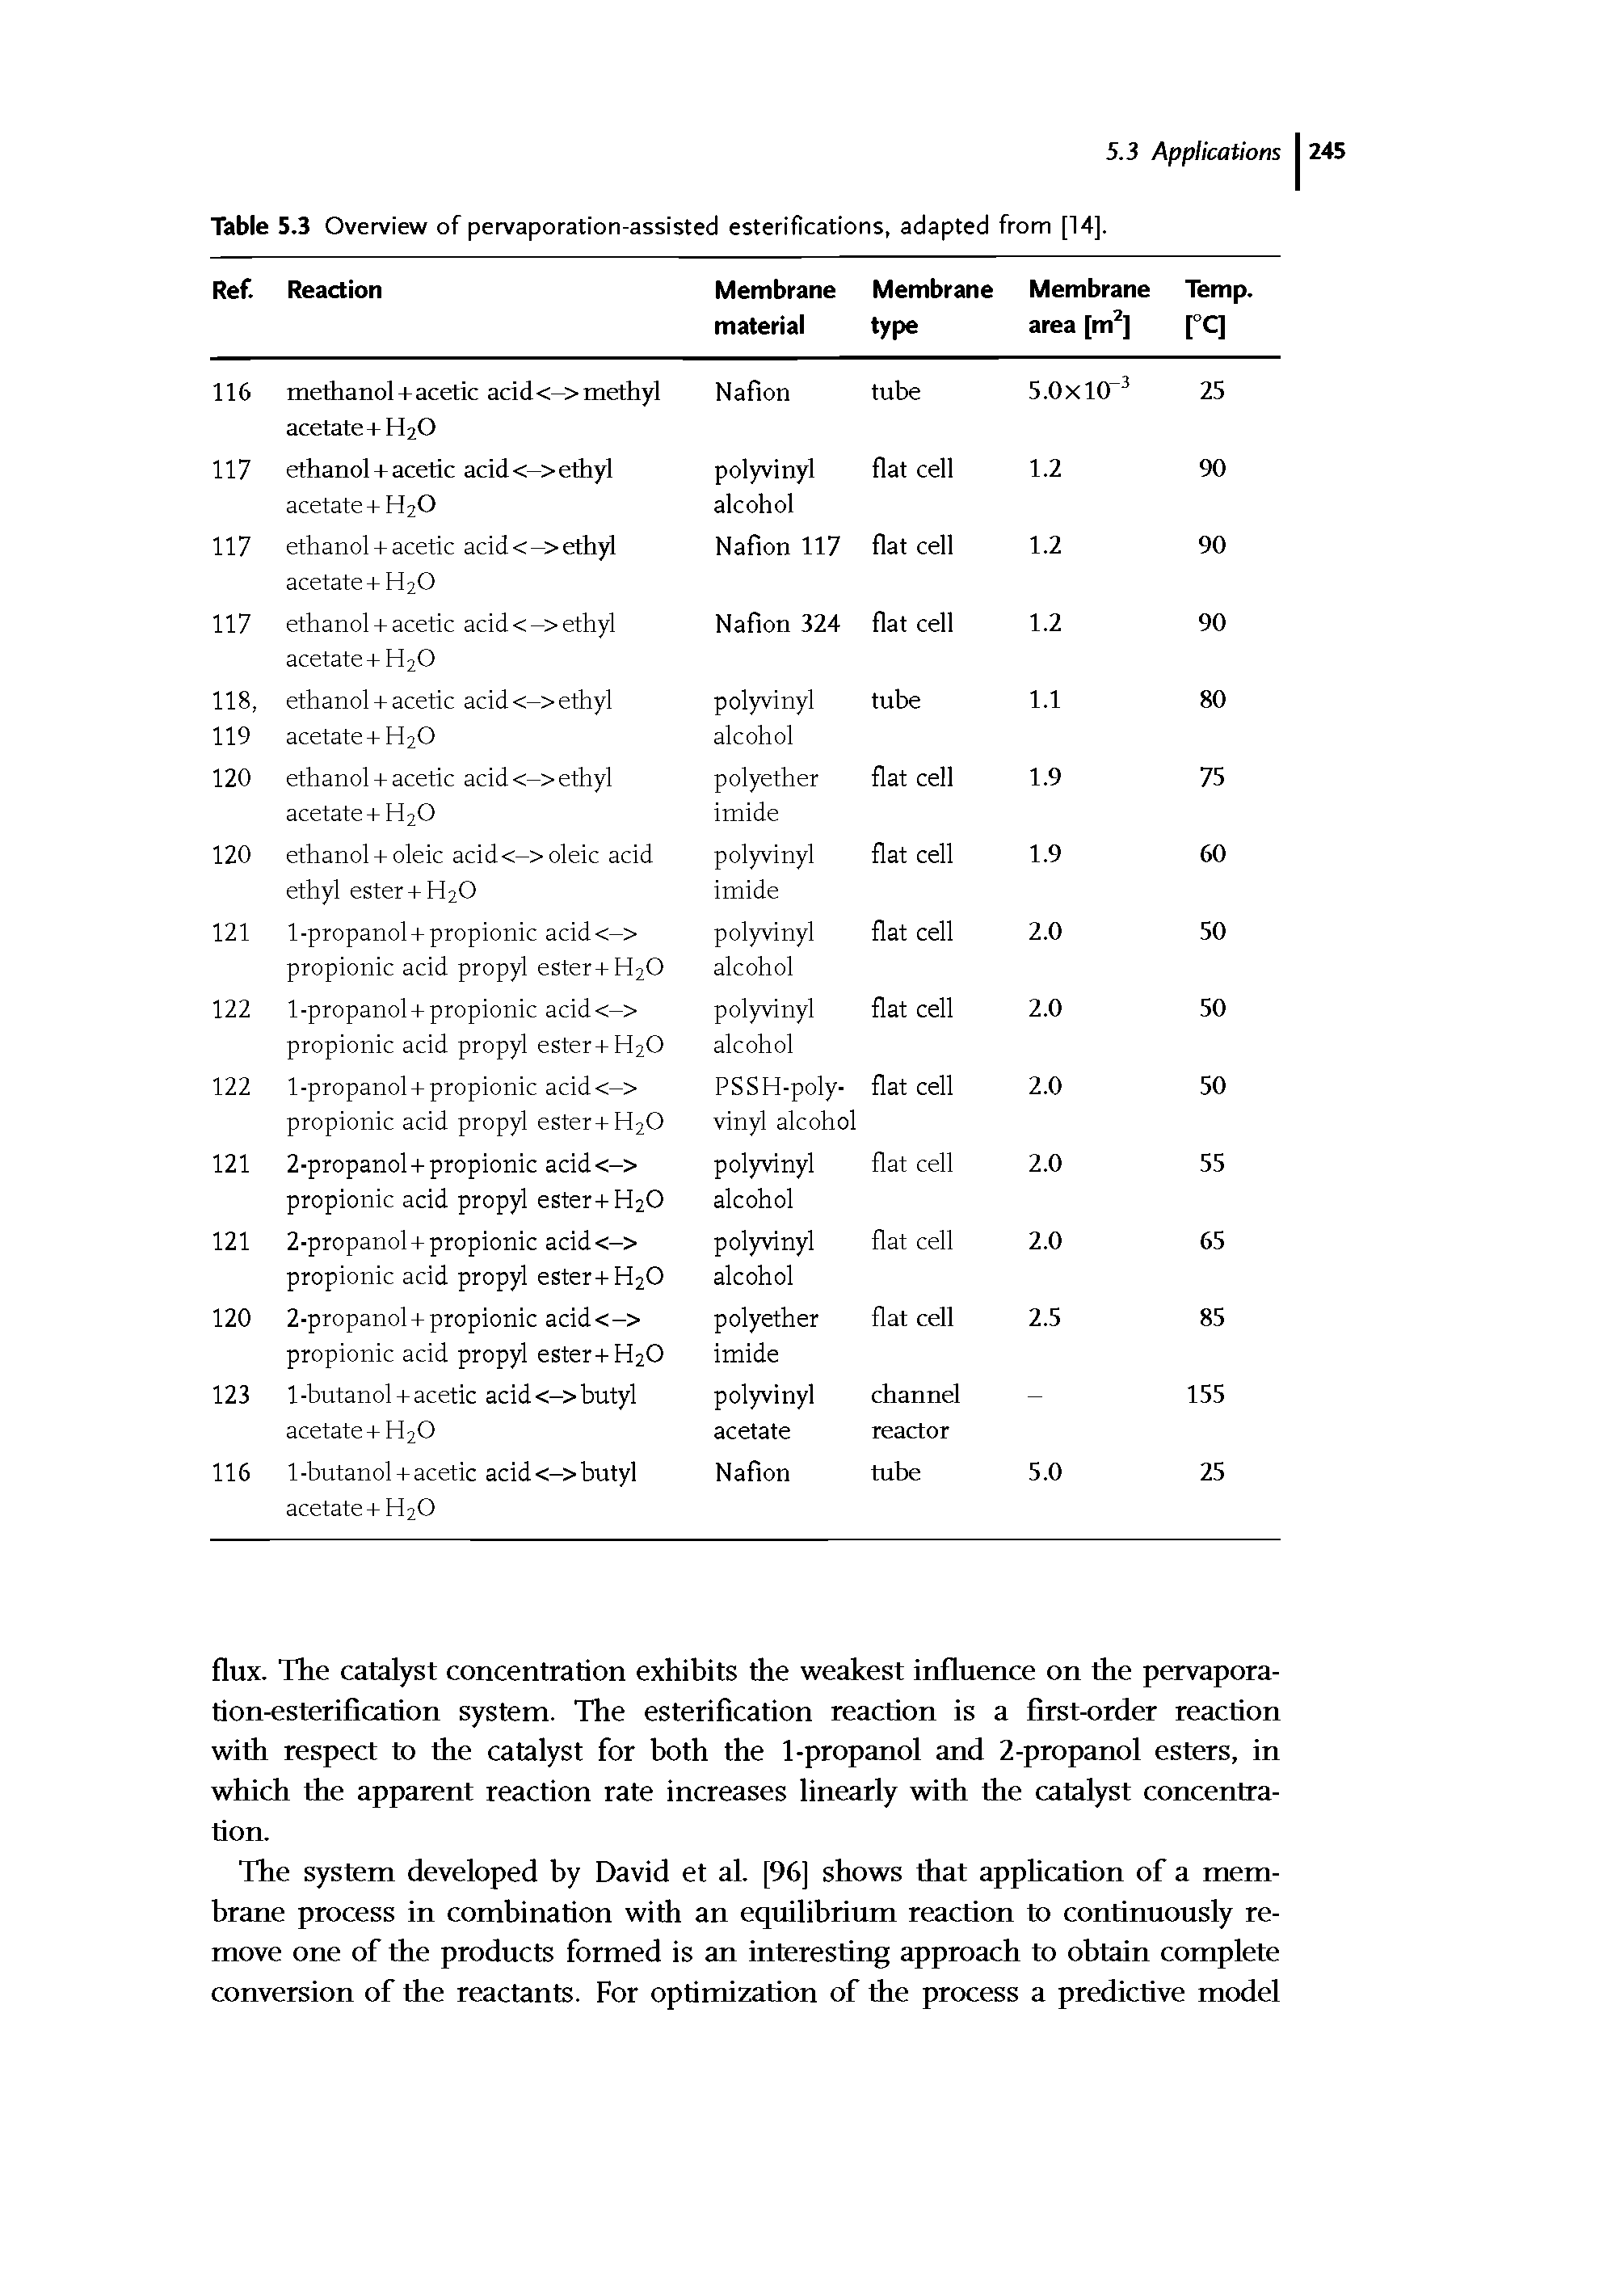 Table 5.3 Overview of pervaporation-assisted esterifications, adapted from [14].